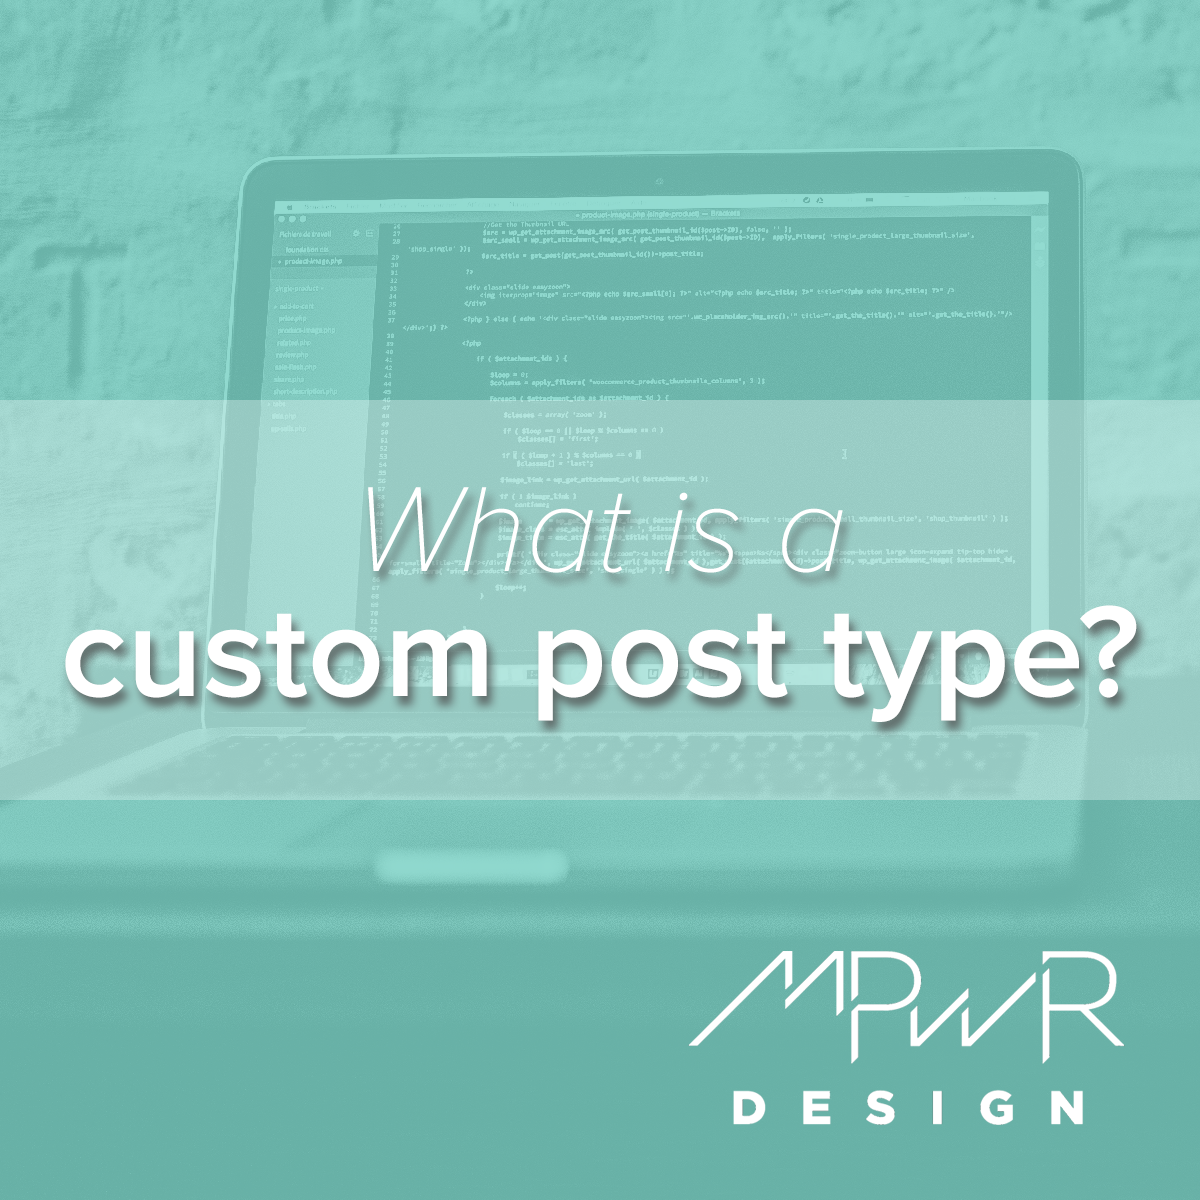 what-is-a-custom-post-type-mpwr-design